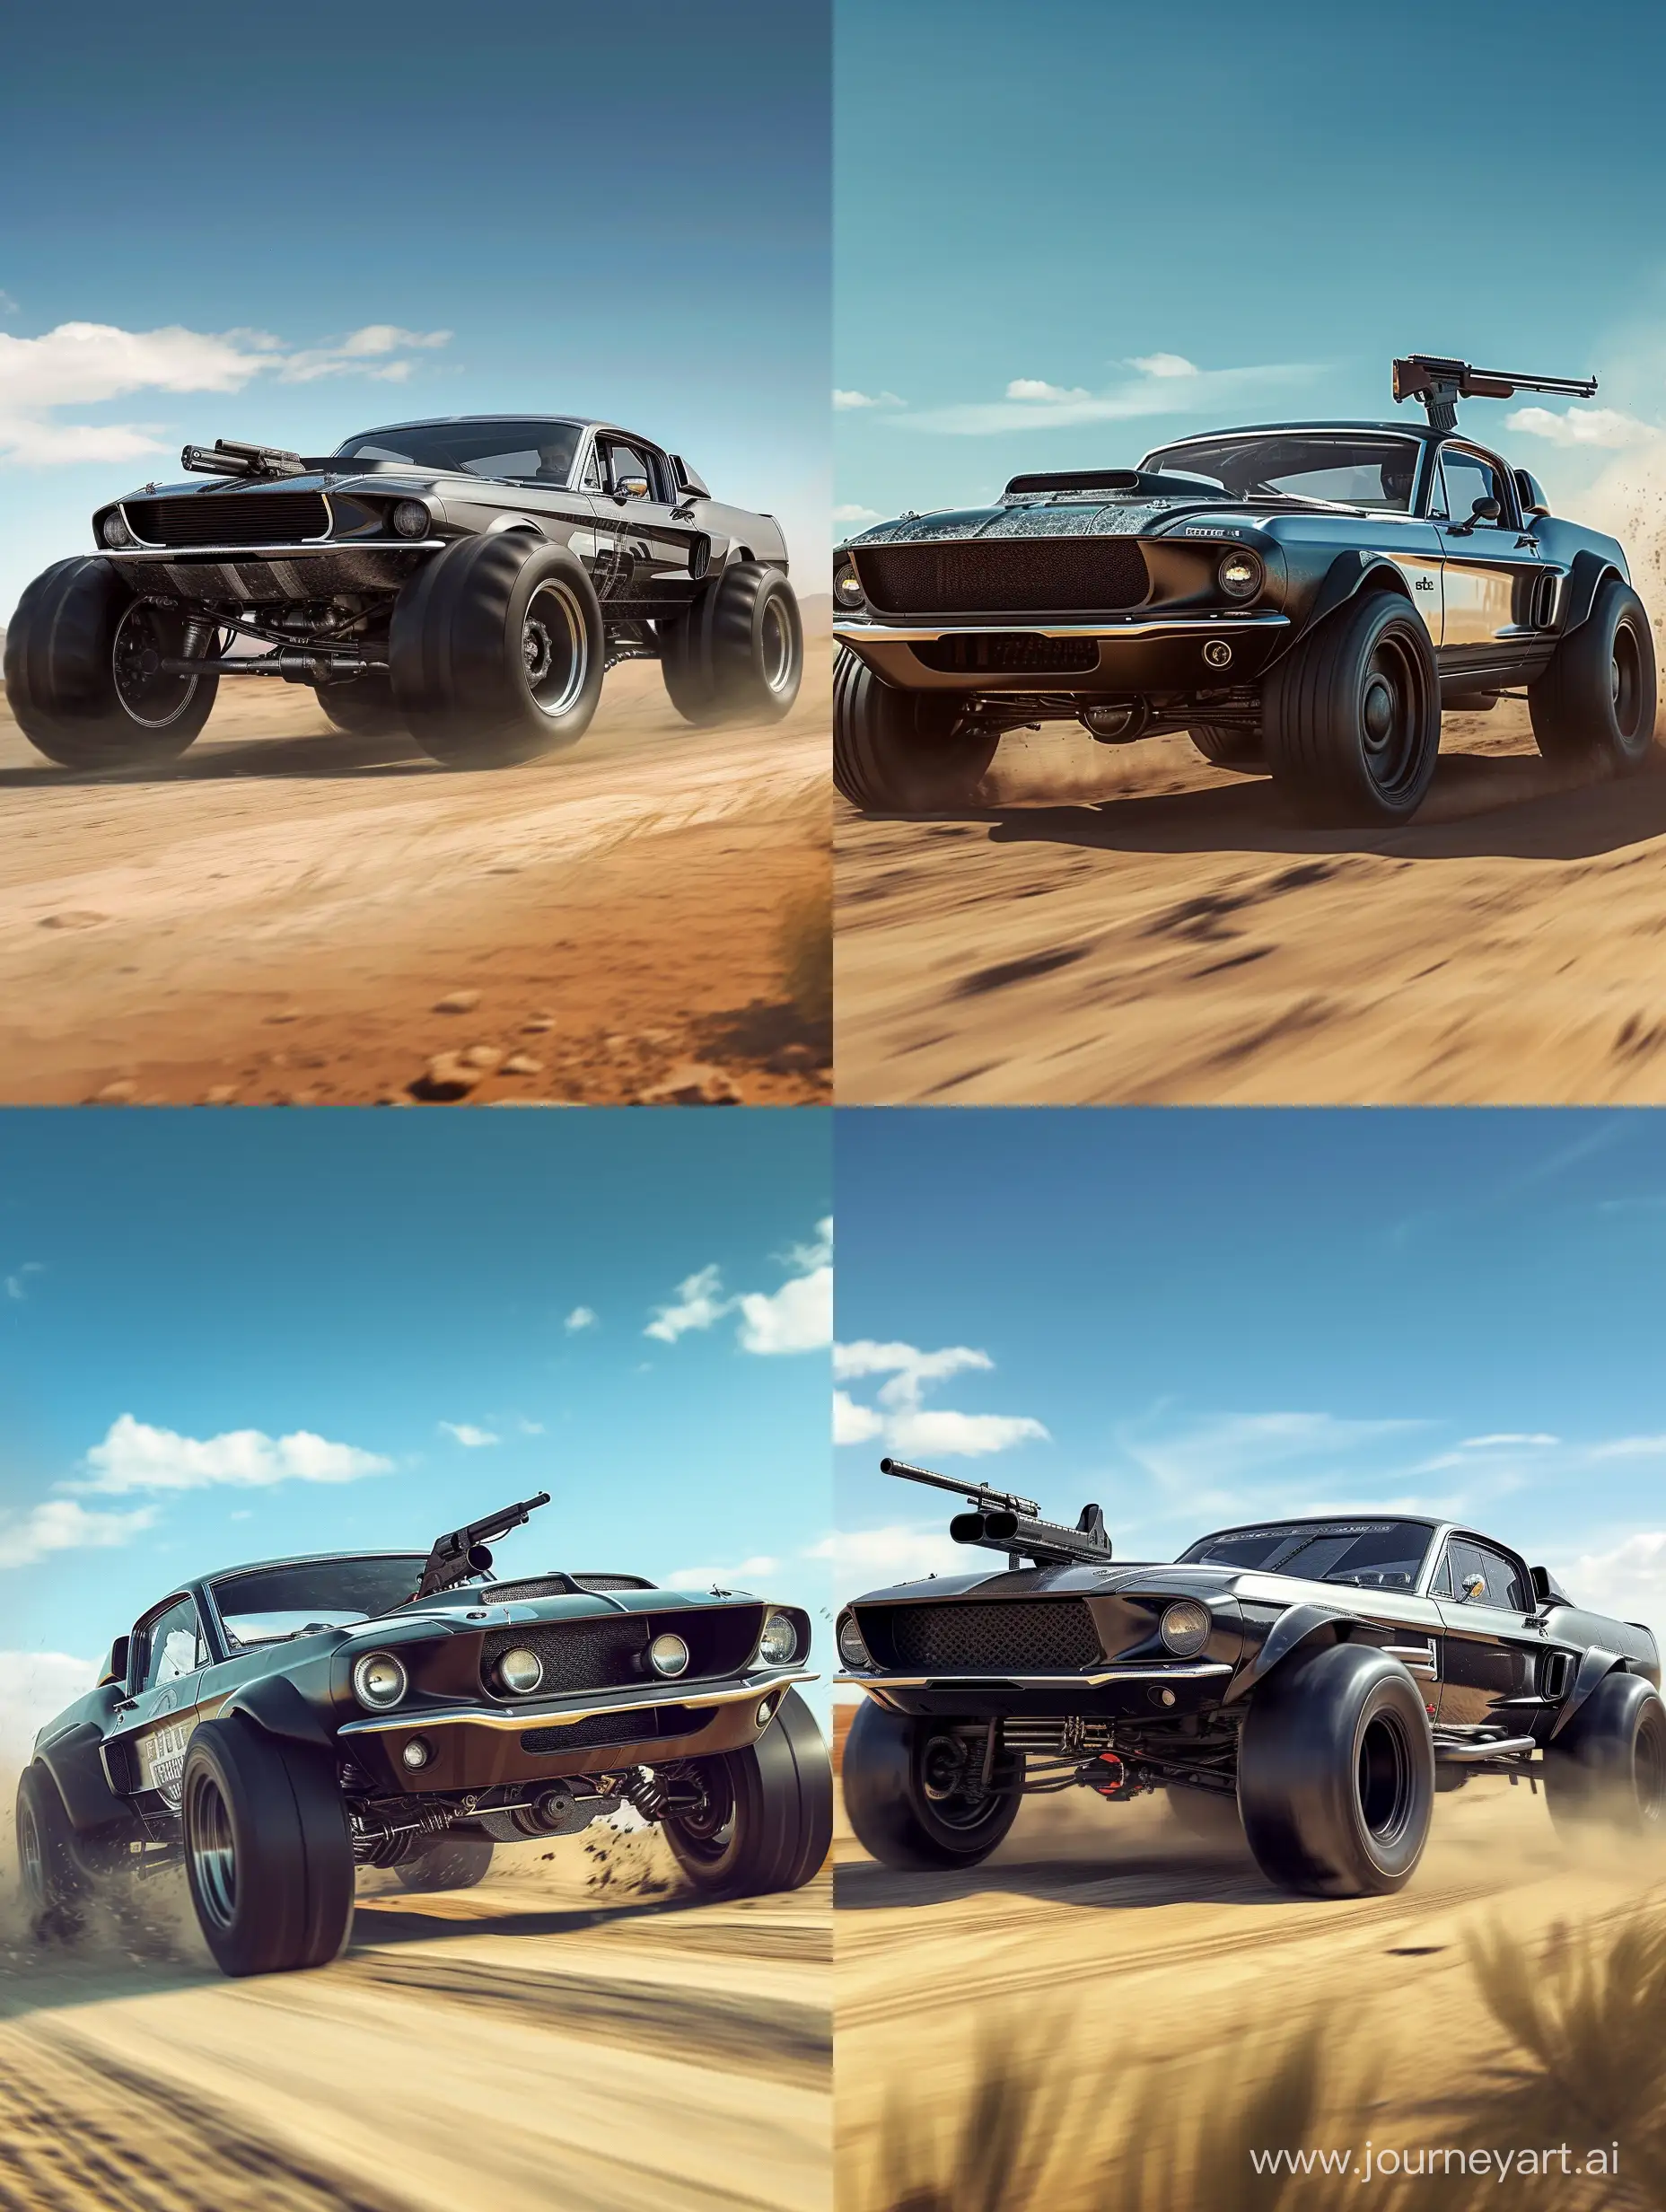 A black and silver 1967 Ford Mustang is shown in a desert setting. It has large black tires and is driving on a dirt road. There is a gun on the front of the car, and the sky is blue with some clouds.